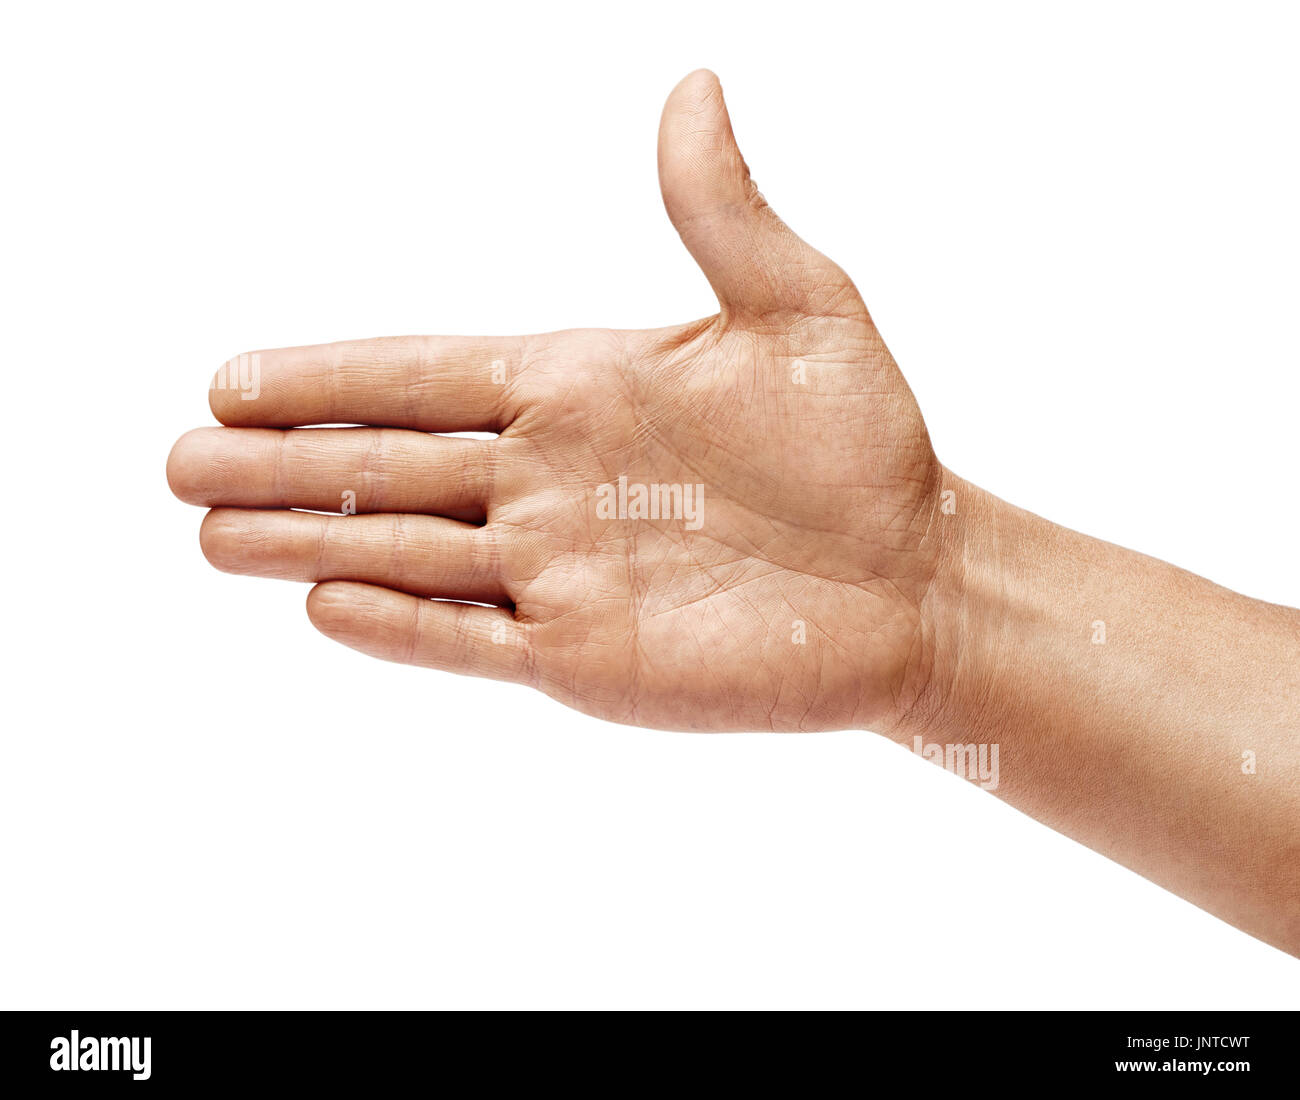 Man's hand outstretched in greeting isolated on white background. Close up. High resolution Stock Photo